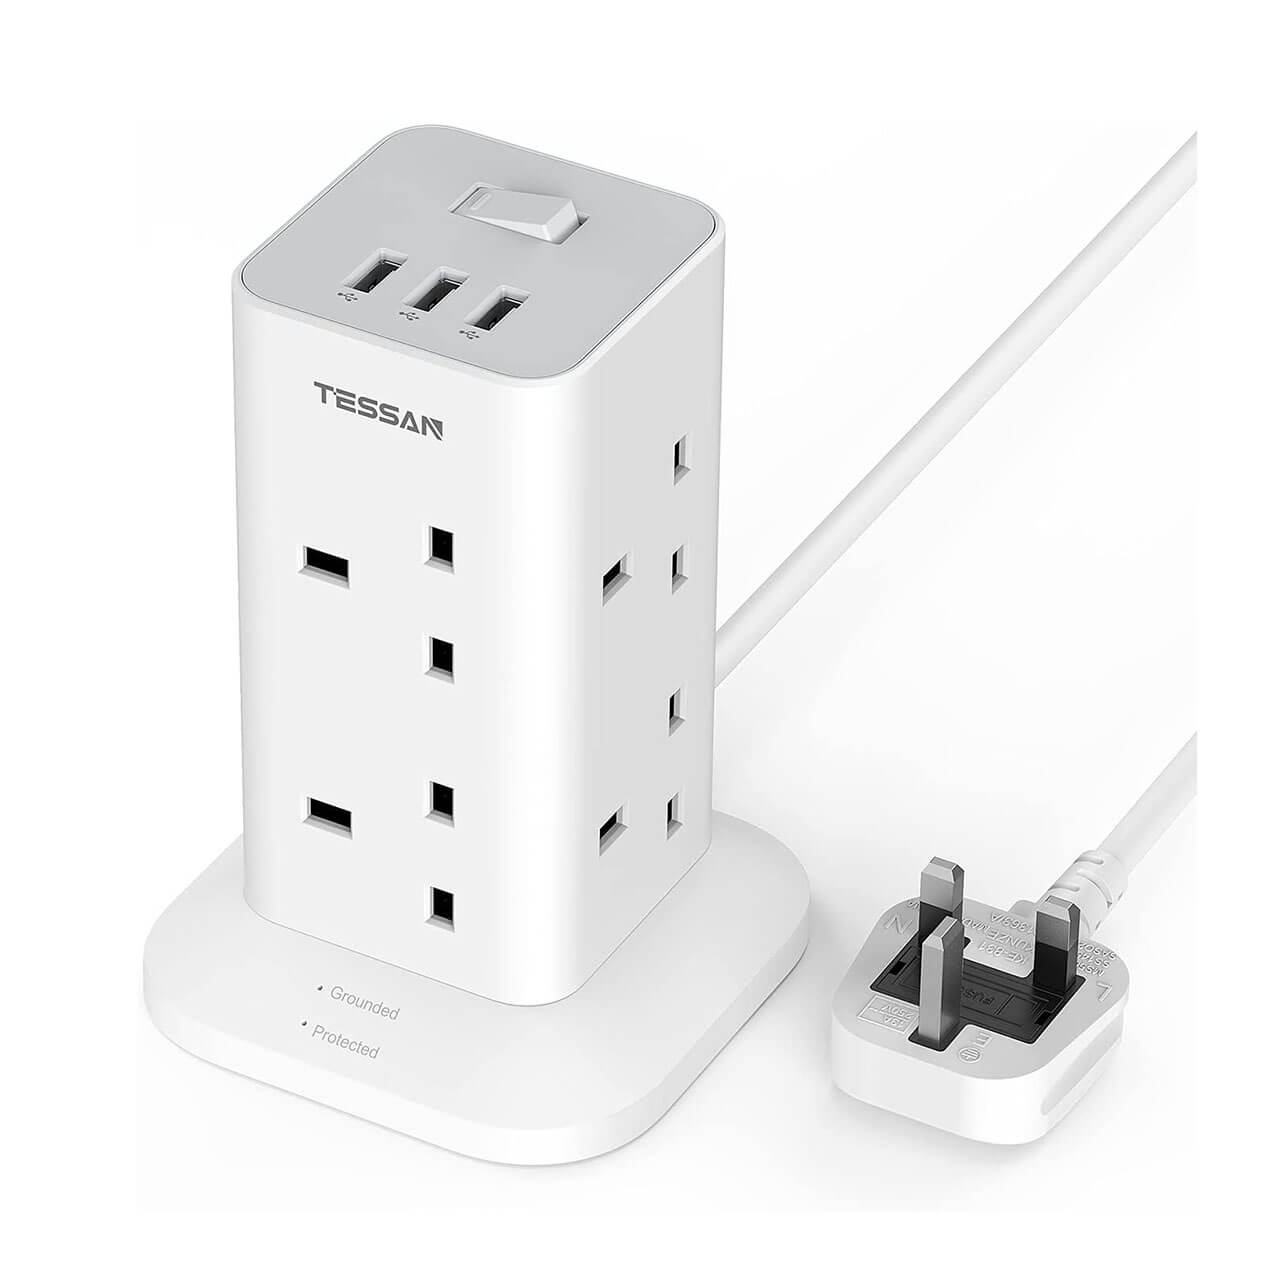 Tessan Tower Outlet with 8 AC Sockets and 3 USB Ports